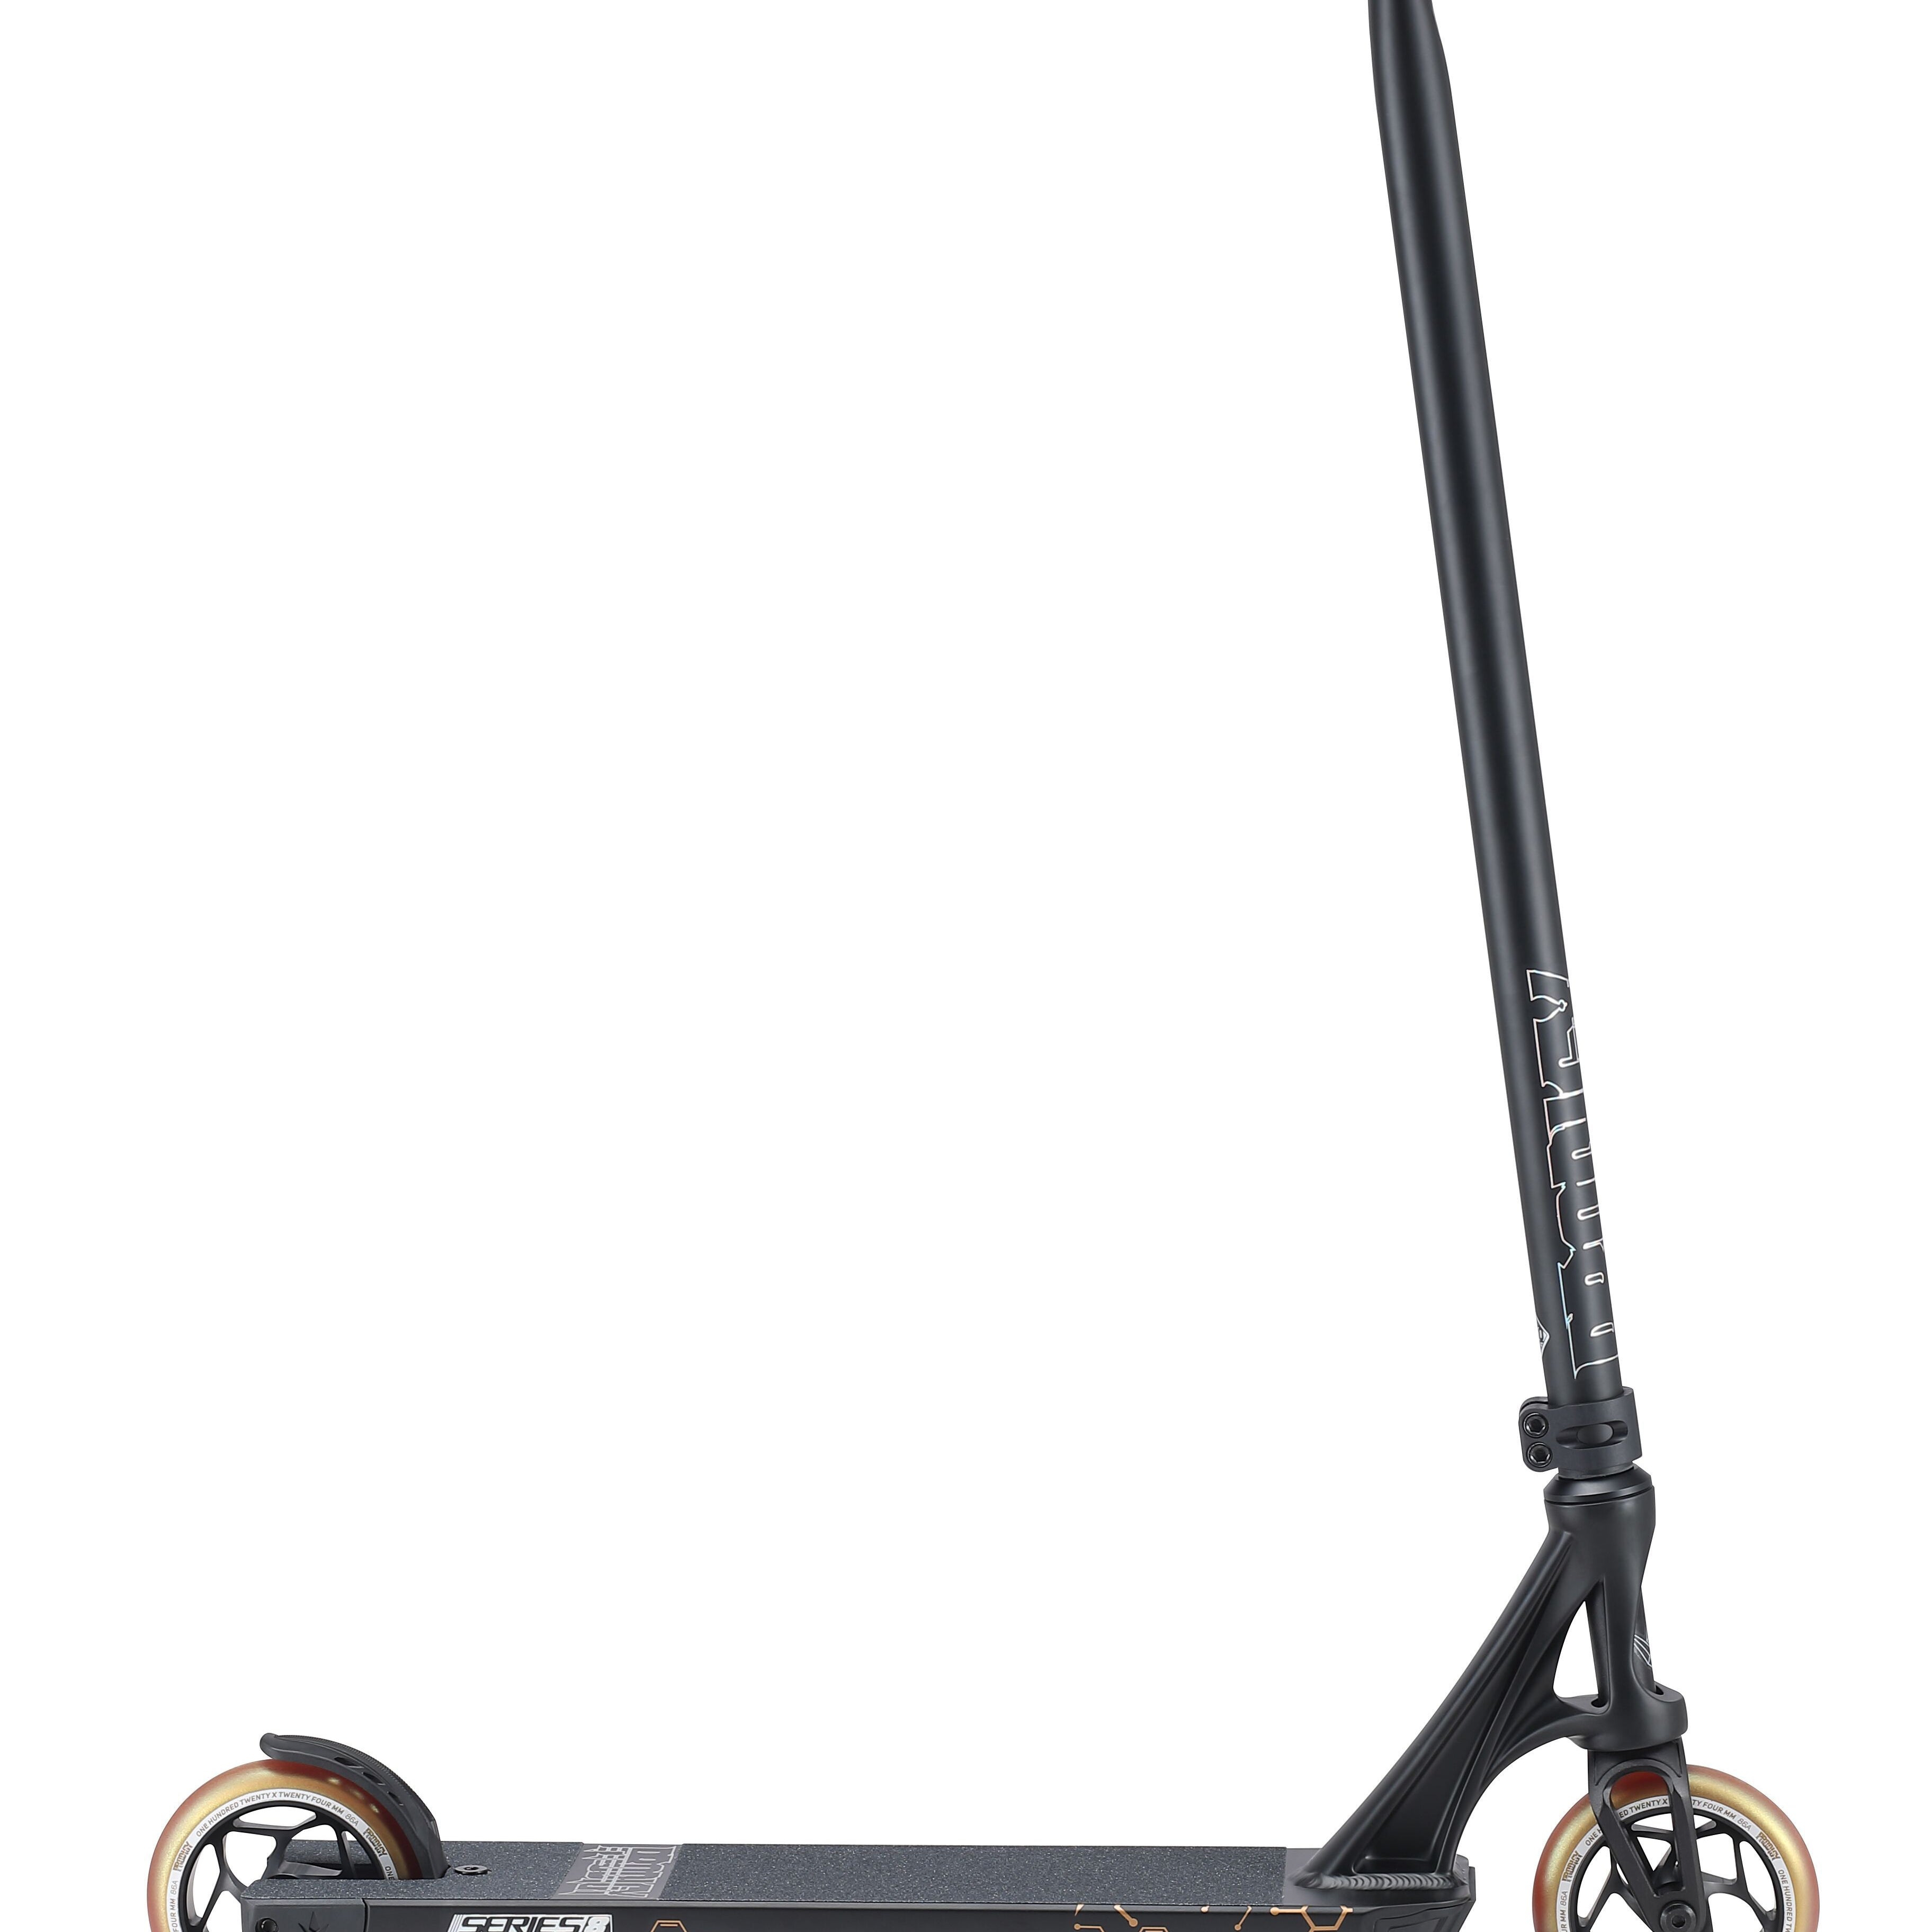 Envy Prodigy S8 Street Edition - Scooter Complete Black Gold Side View